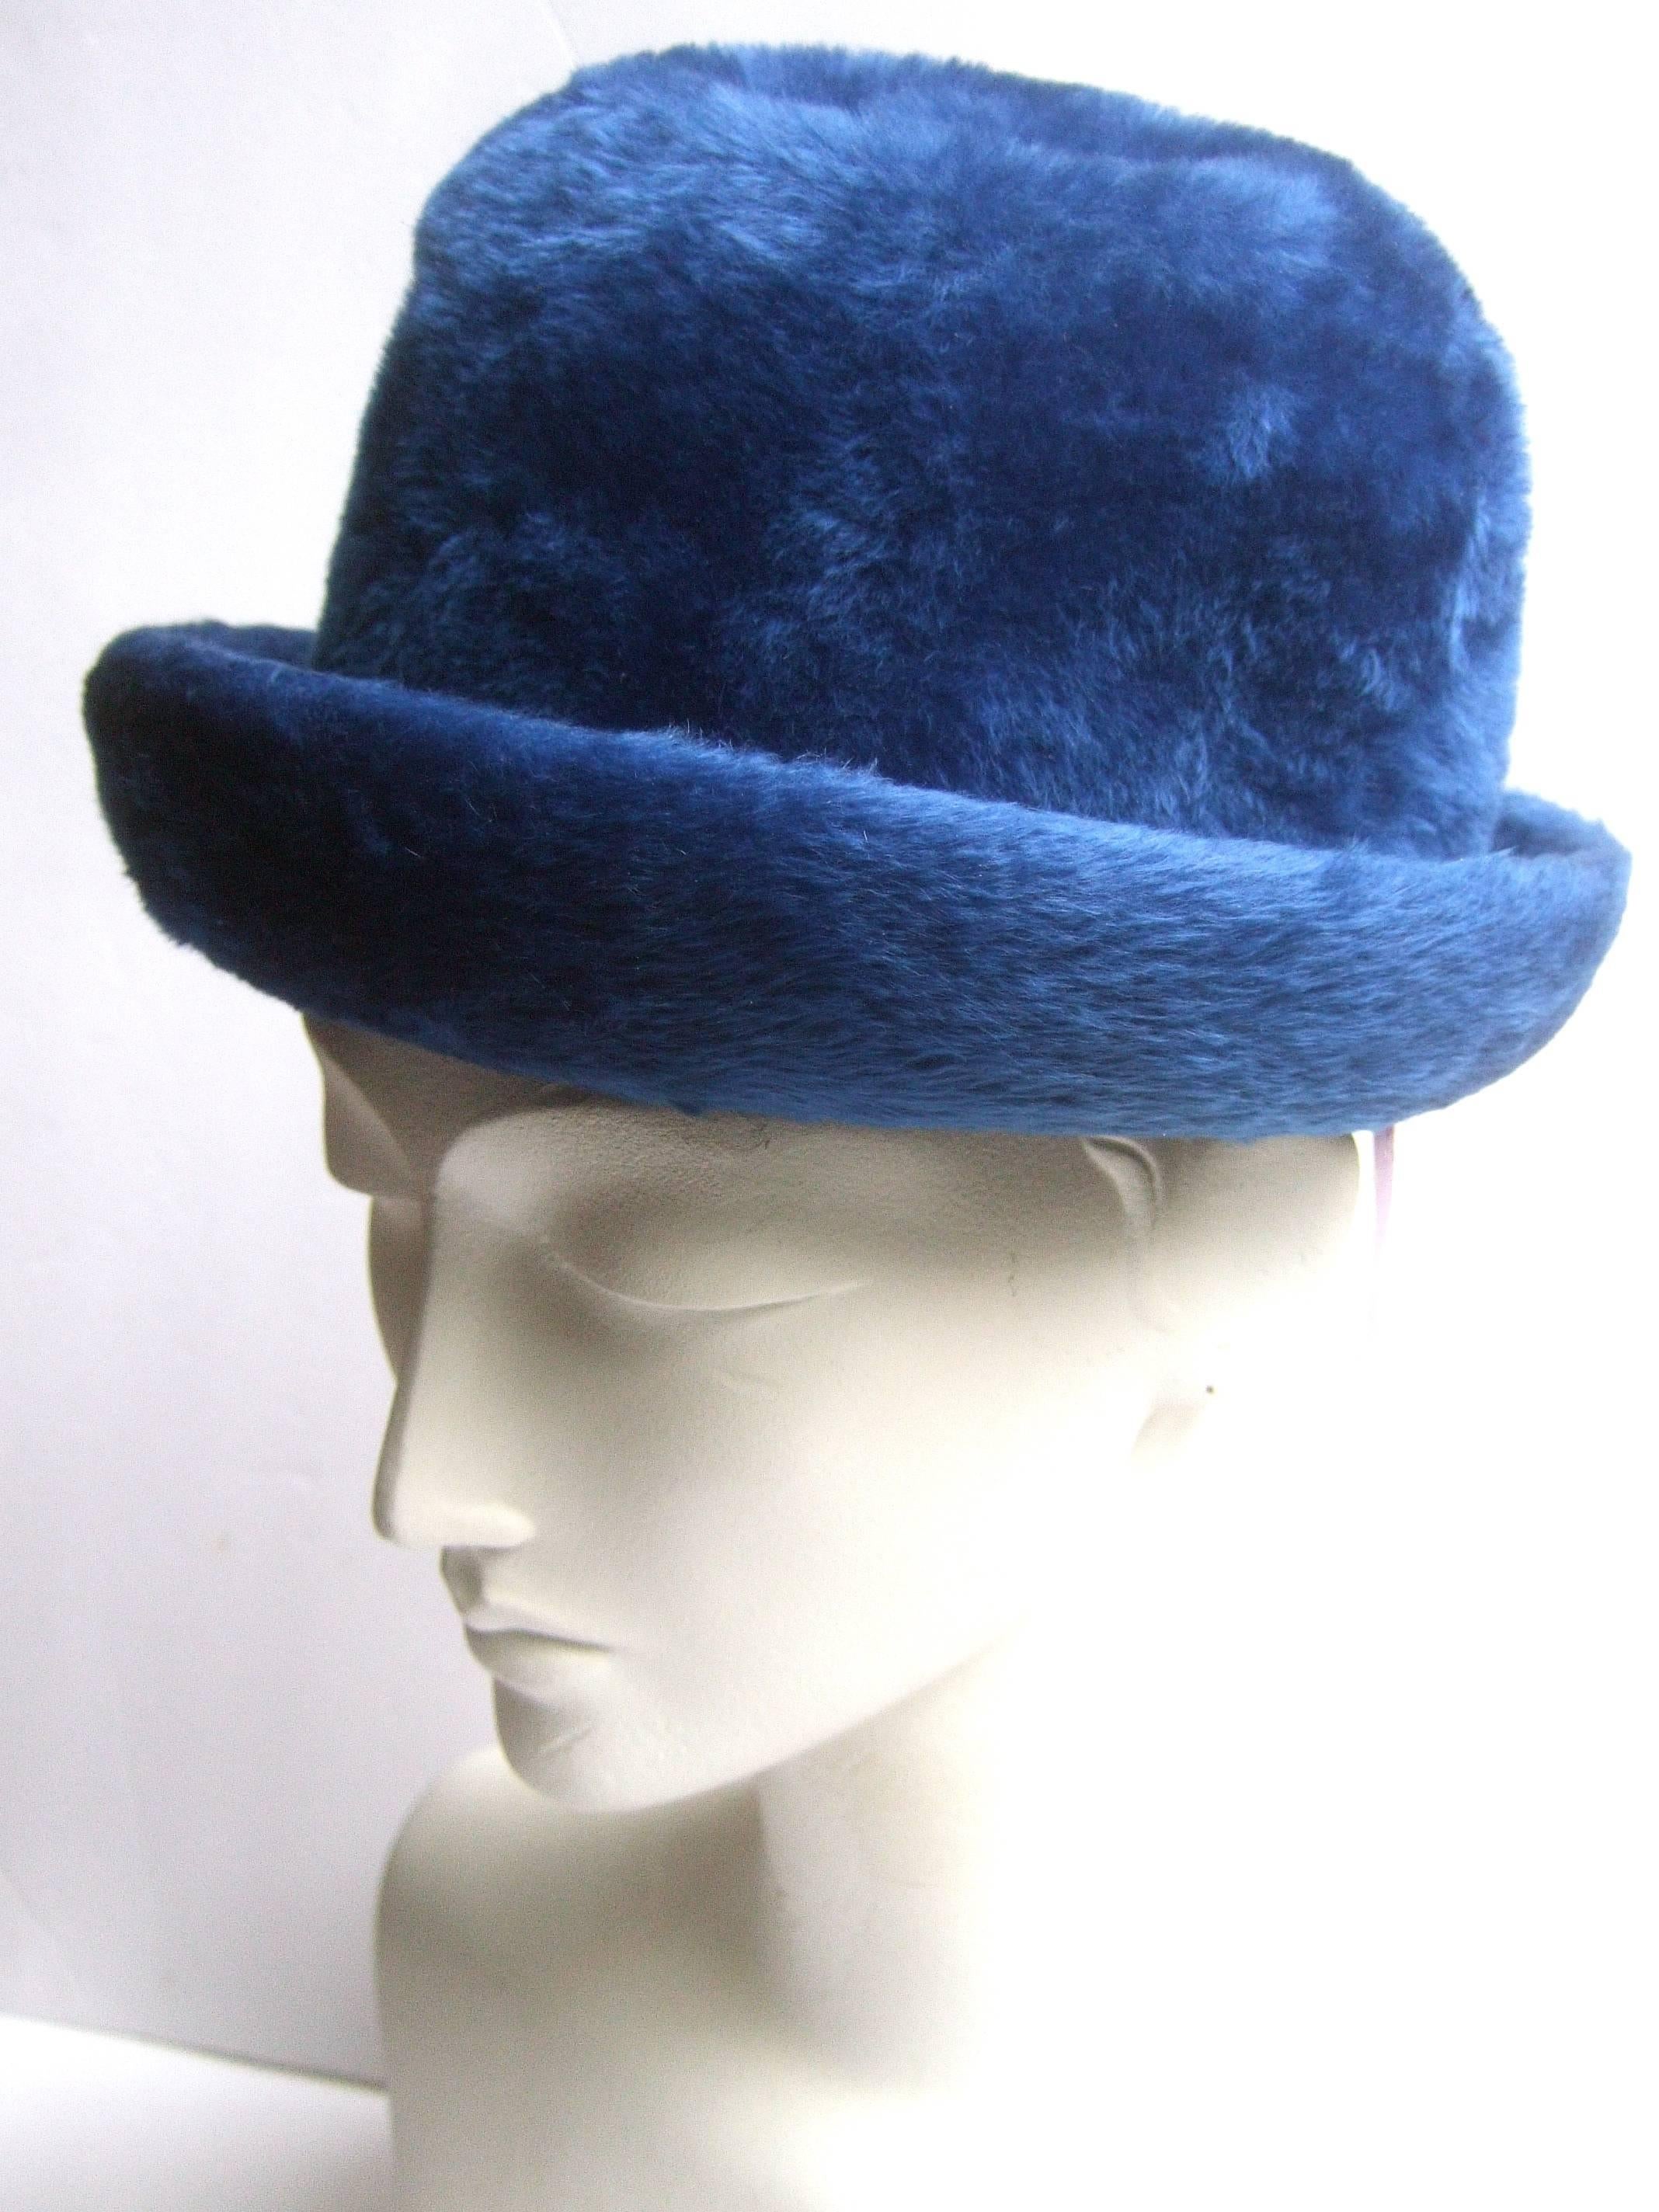 Schiaparelli Paris fuzzy blue felt wool hat ca 1960
The stylish chapeau is paired with a gilt metal hat
pin accented with a dangling crystal orb 

Makes a striking accessory as well as 
a chic 20th century collectible

Labeled Schiaparelli Paris